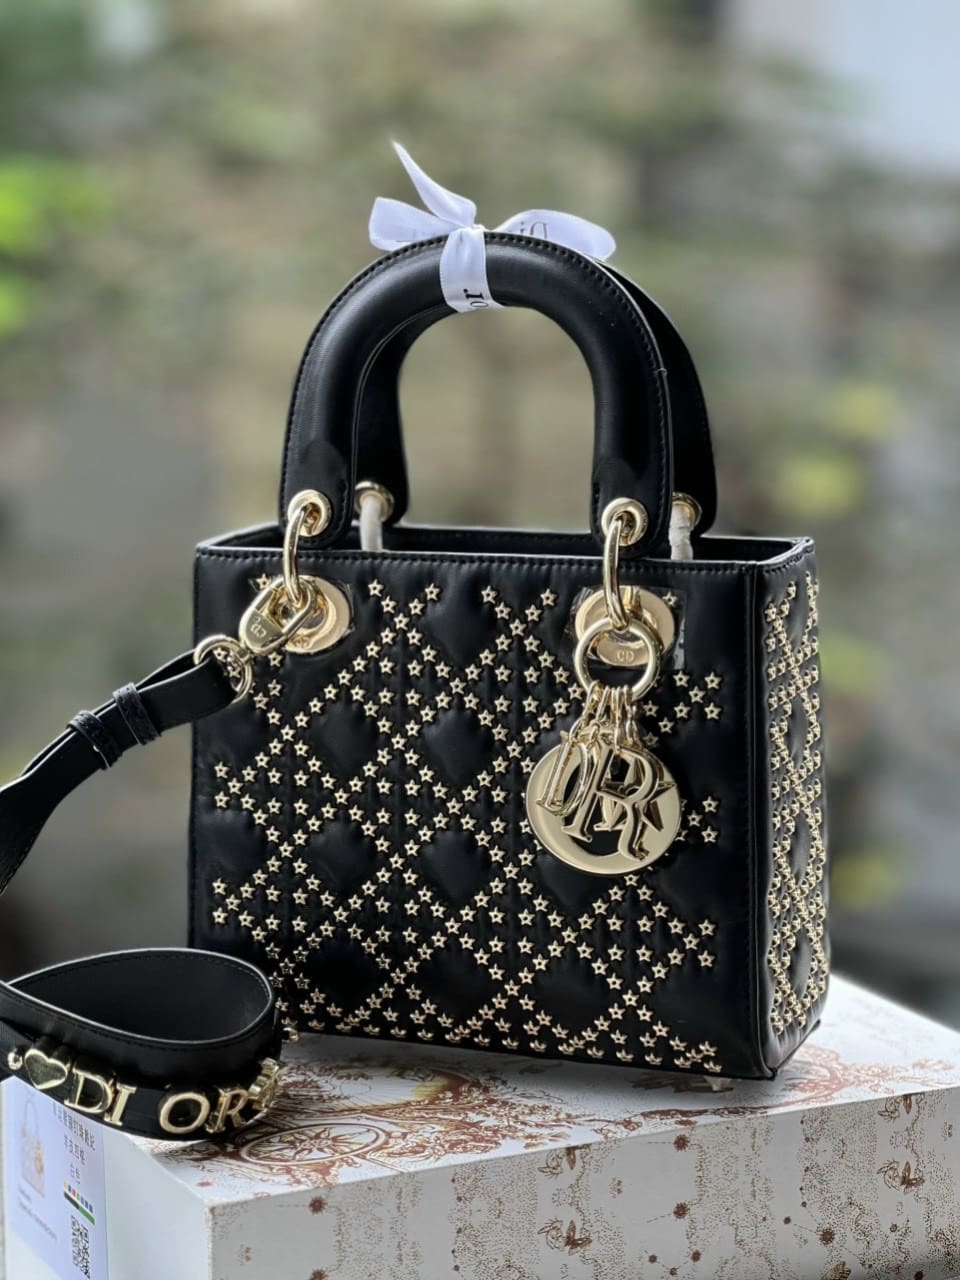 Classic Dior Handbags to Invest In in 2021From the Lady Dior to the Saddle  Bag  Vogue